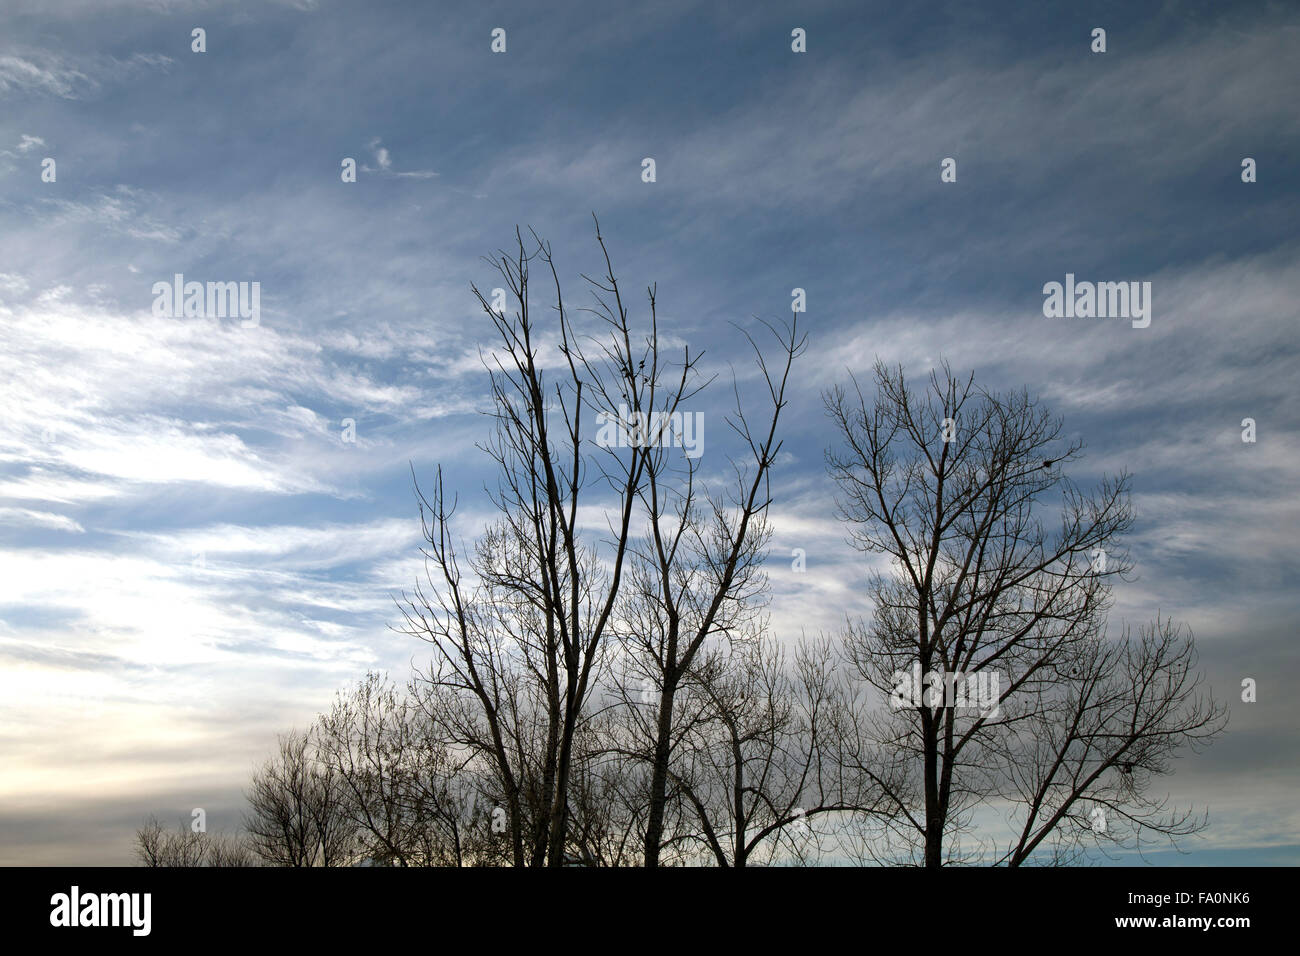 Silhouette of birds and trees against darkening skies Stock Photo